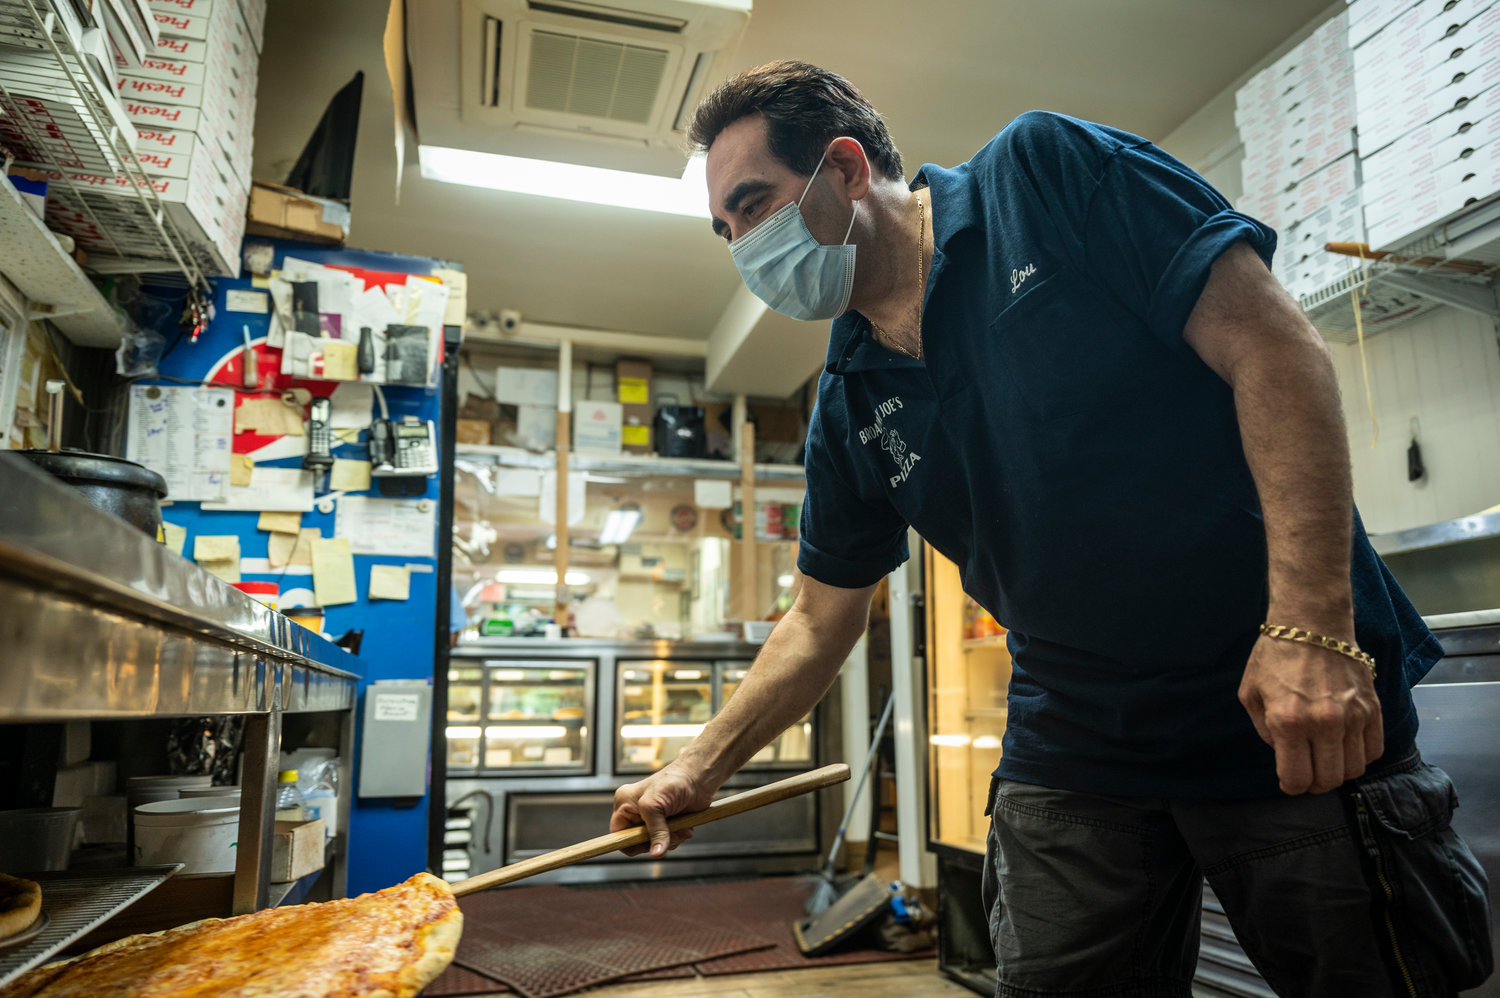 Broadway Joe’s owner Louis cooks the inspiration for Mayor Bill de Blasio’s voting simulation, which asks those looking to cast a ballot Tuesday to rank their top five pizza toppings.